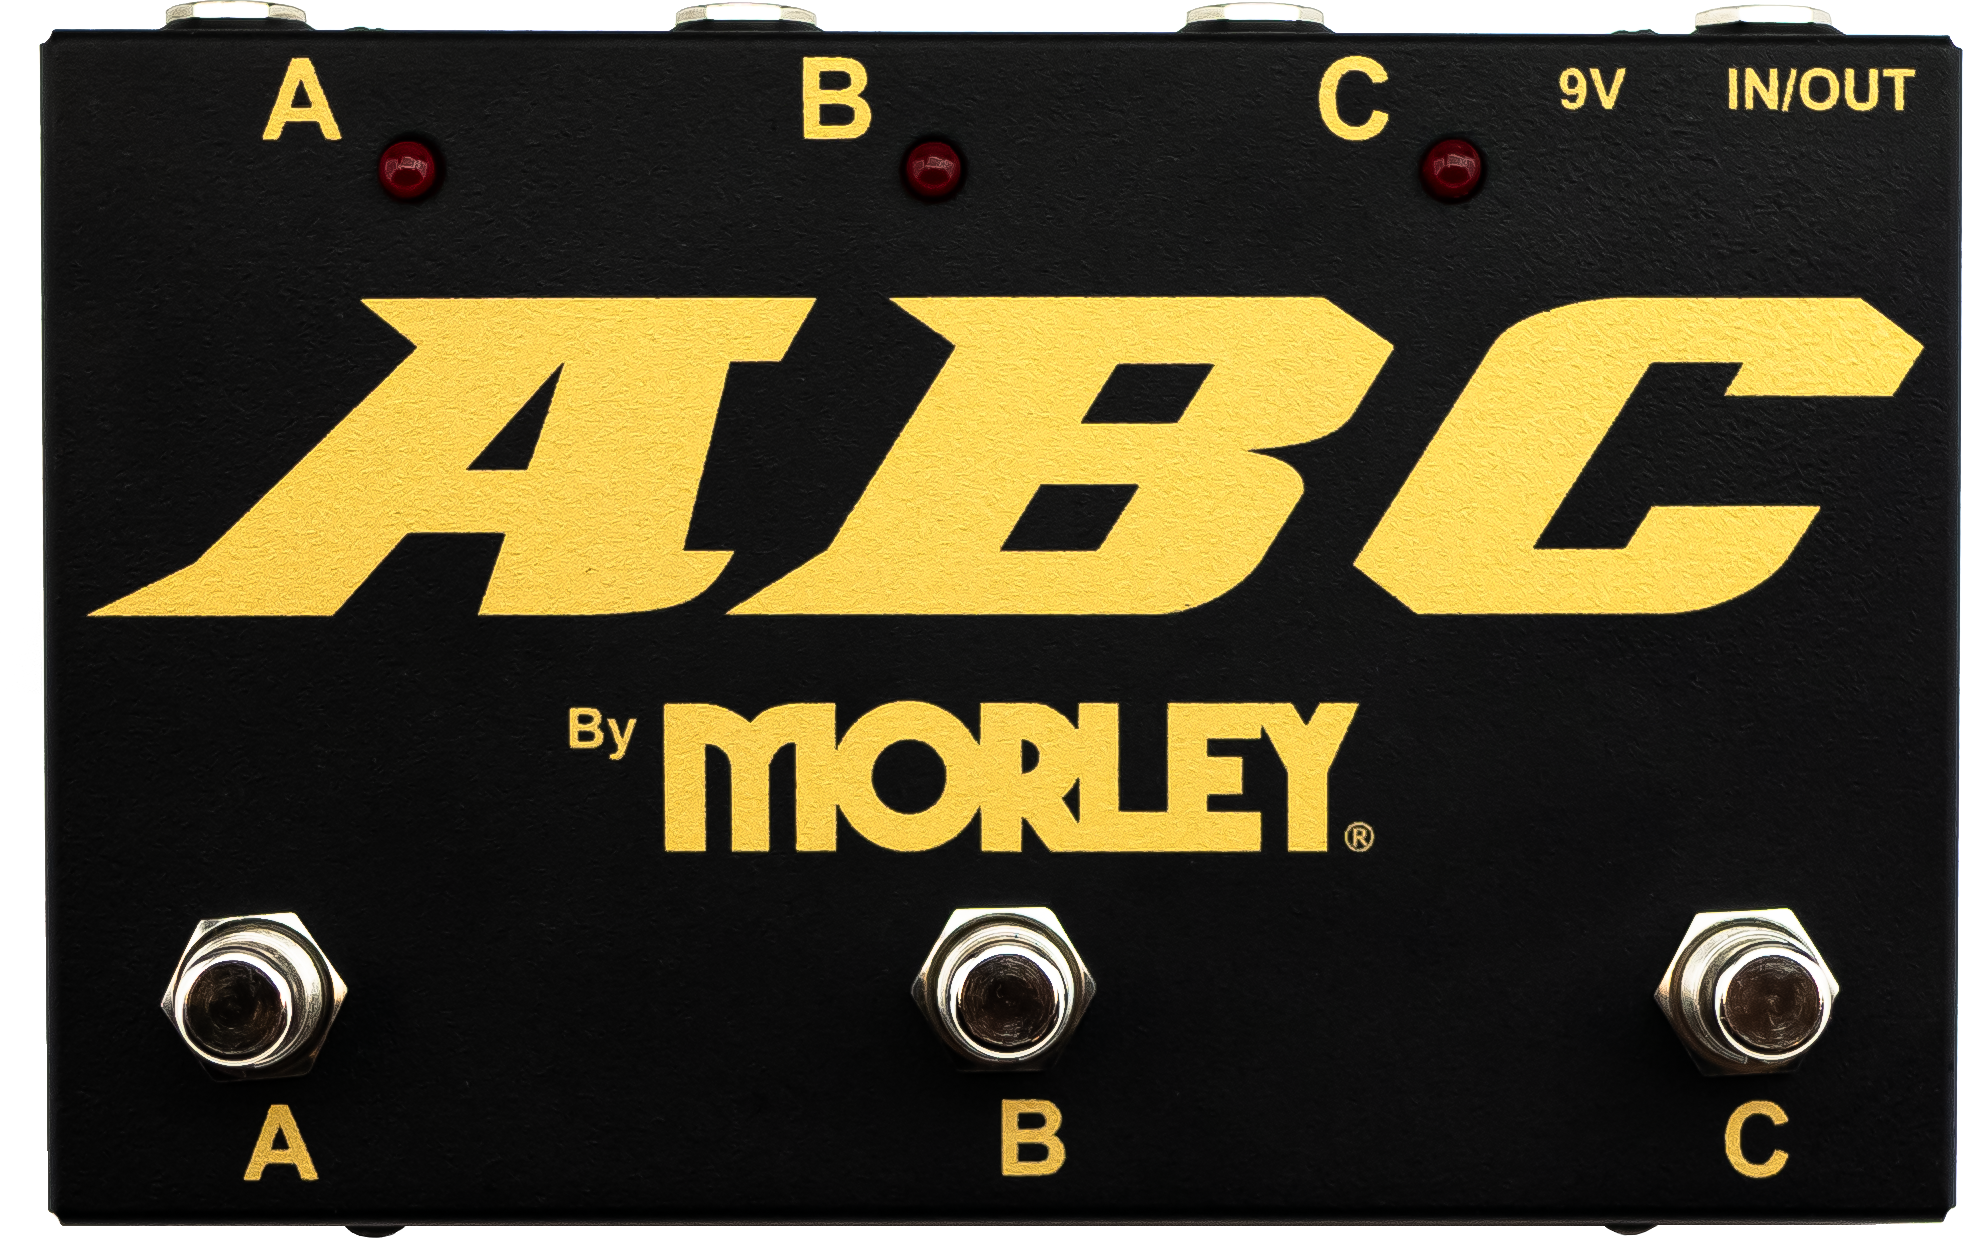 Morley Abc Gold Series Switcher 1 Vers 3 Ou 3 Vers 1 - Switch pedal - Main picture